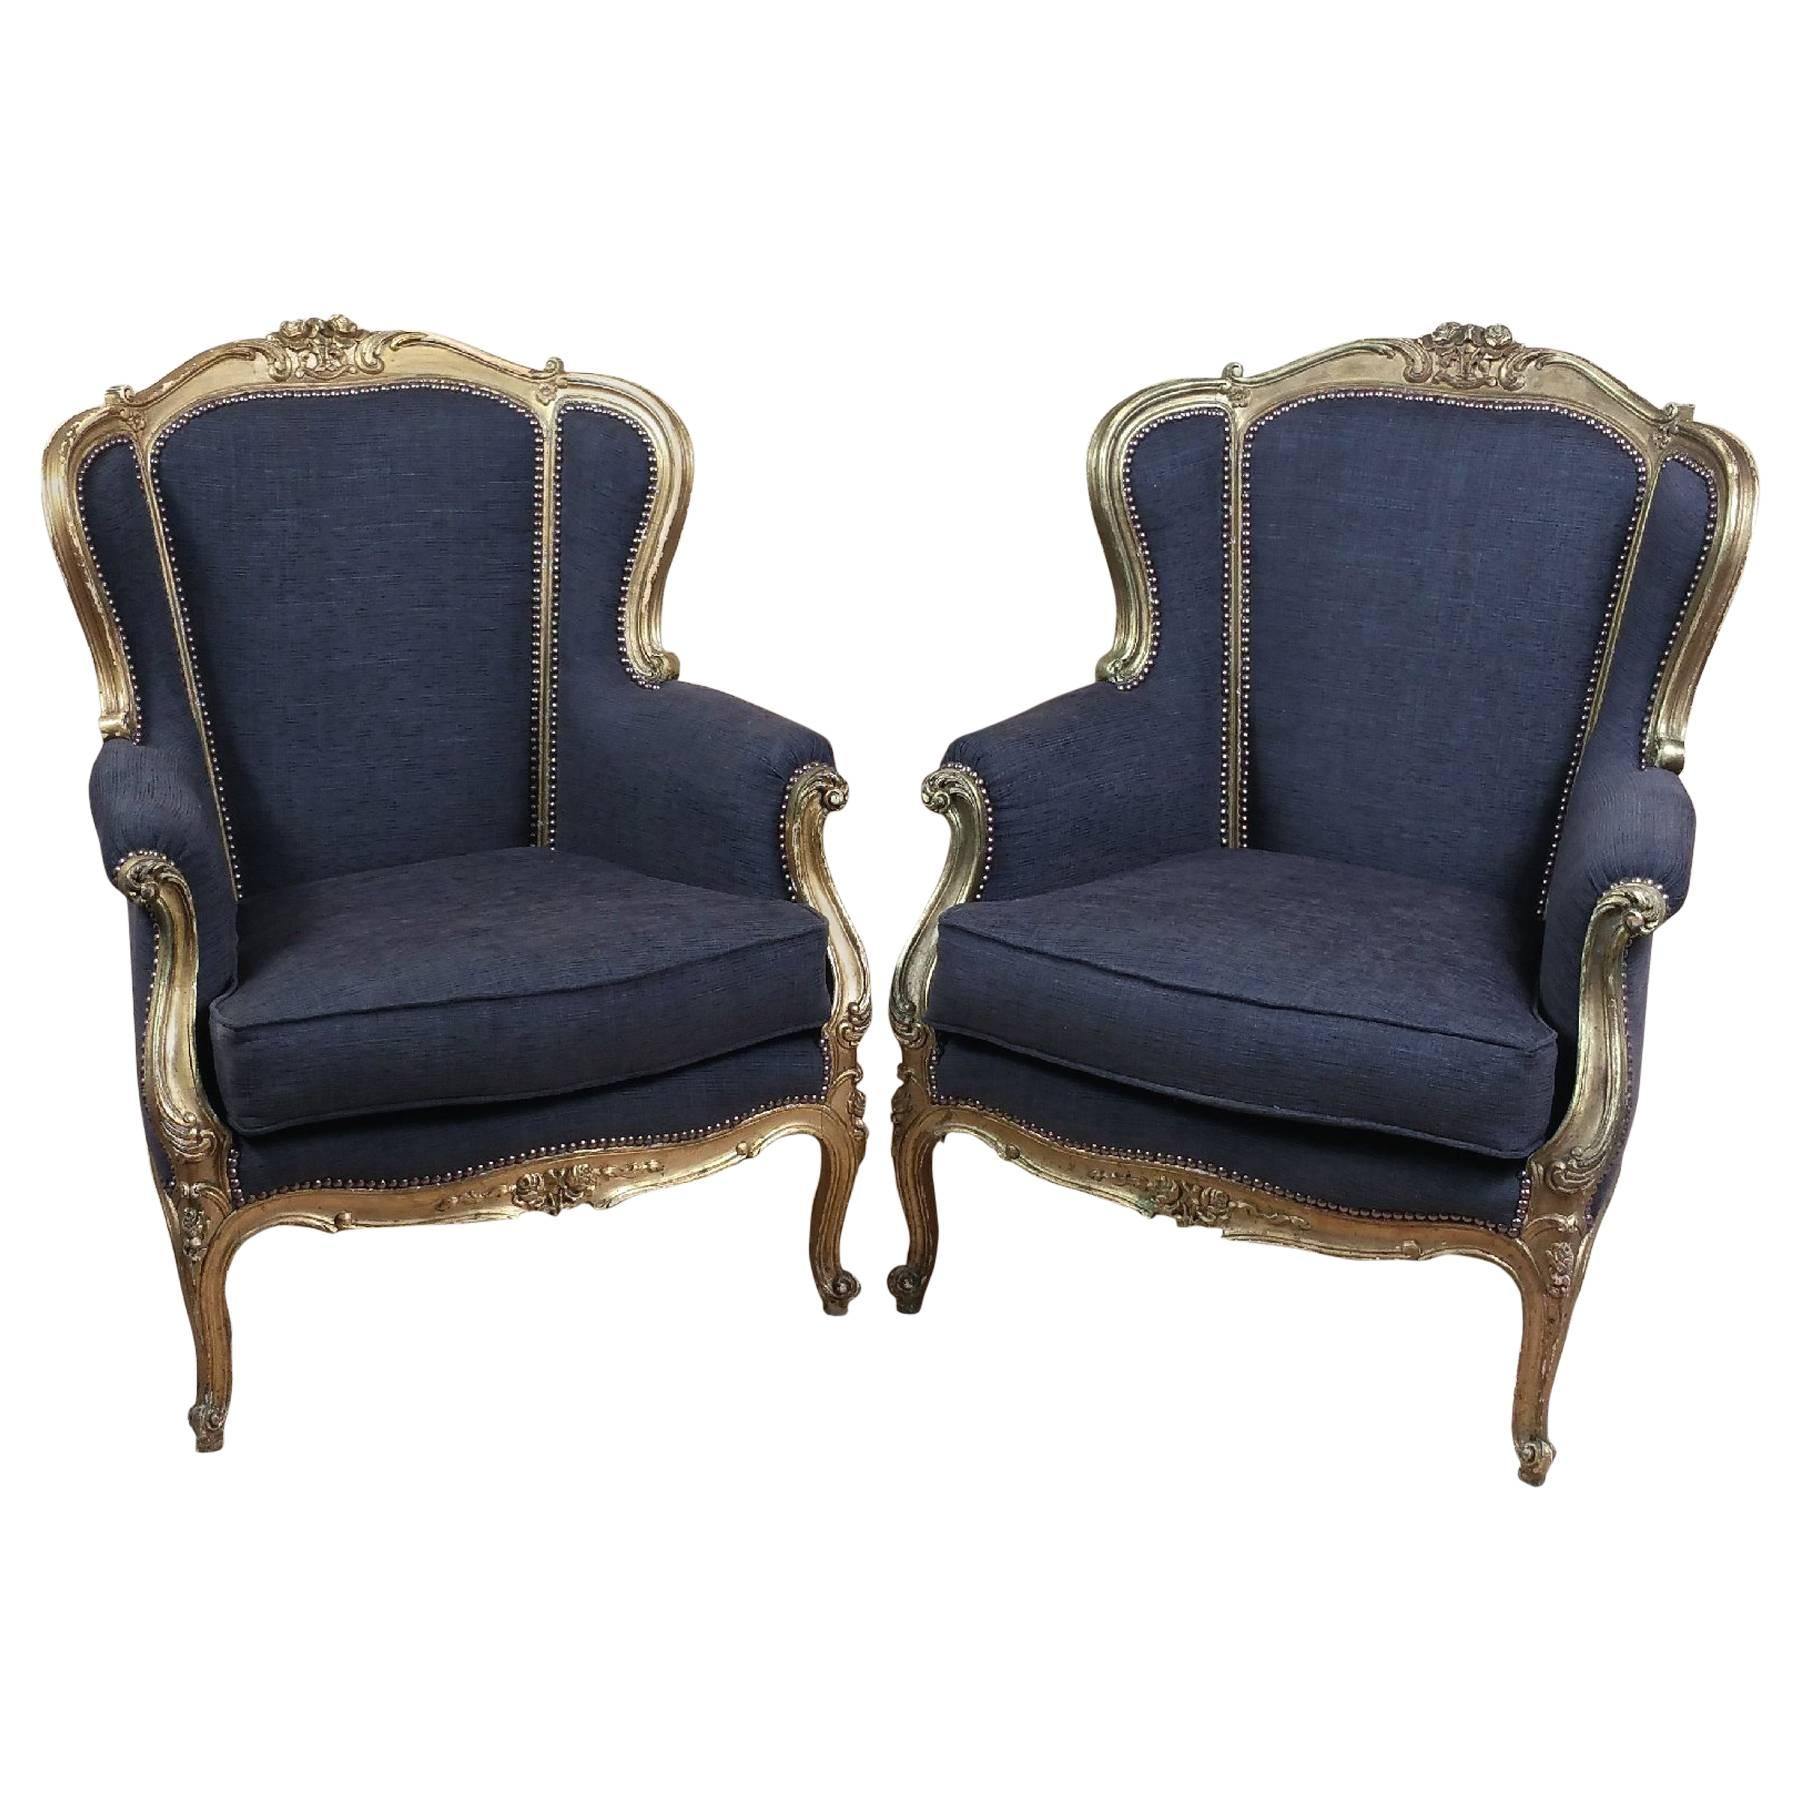 Pair of Late 19th Century French Carved Giltwood Framed Armchairs